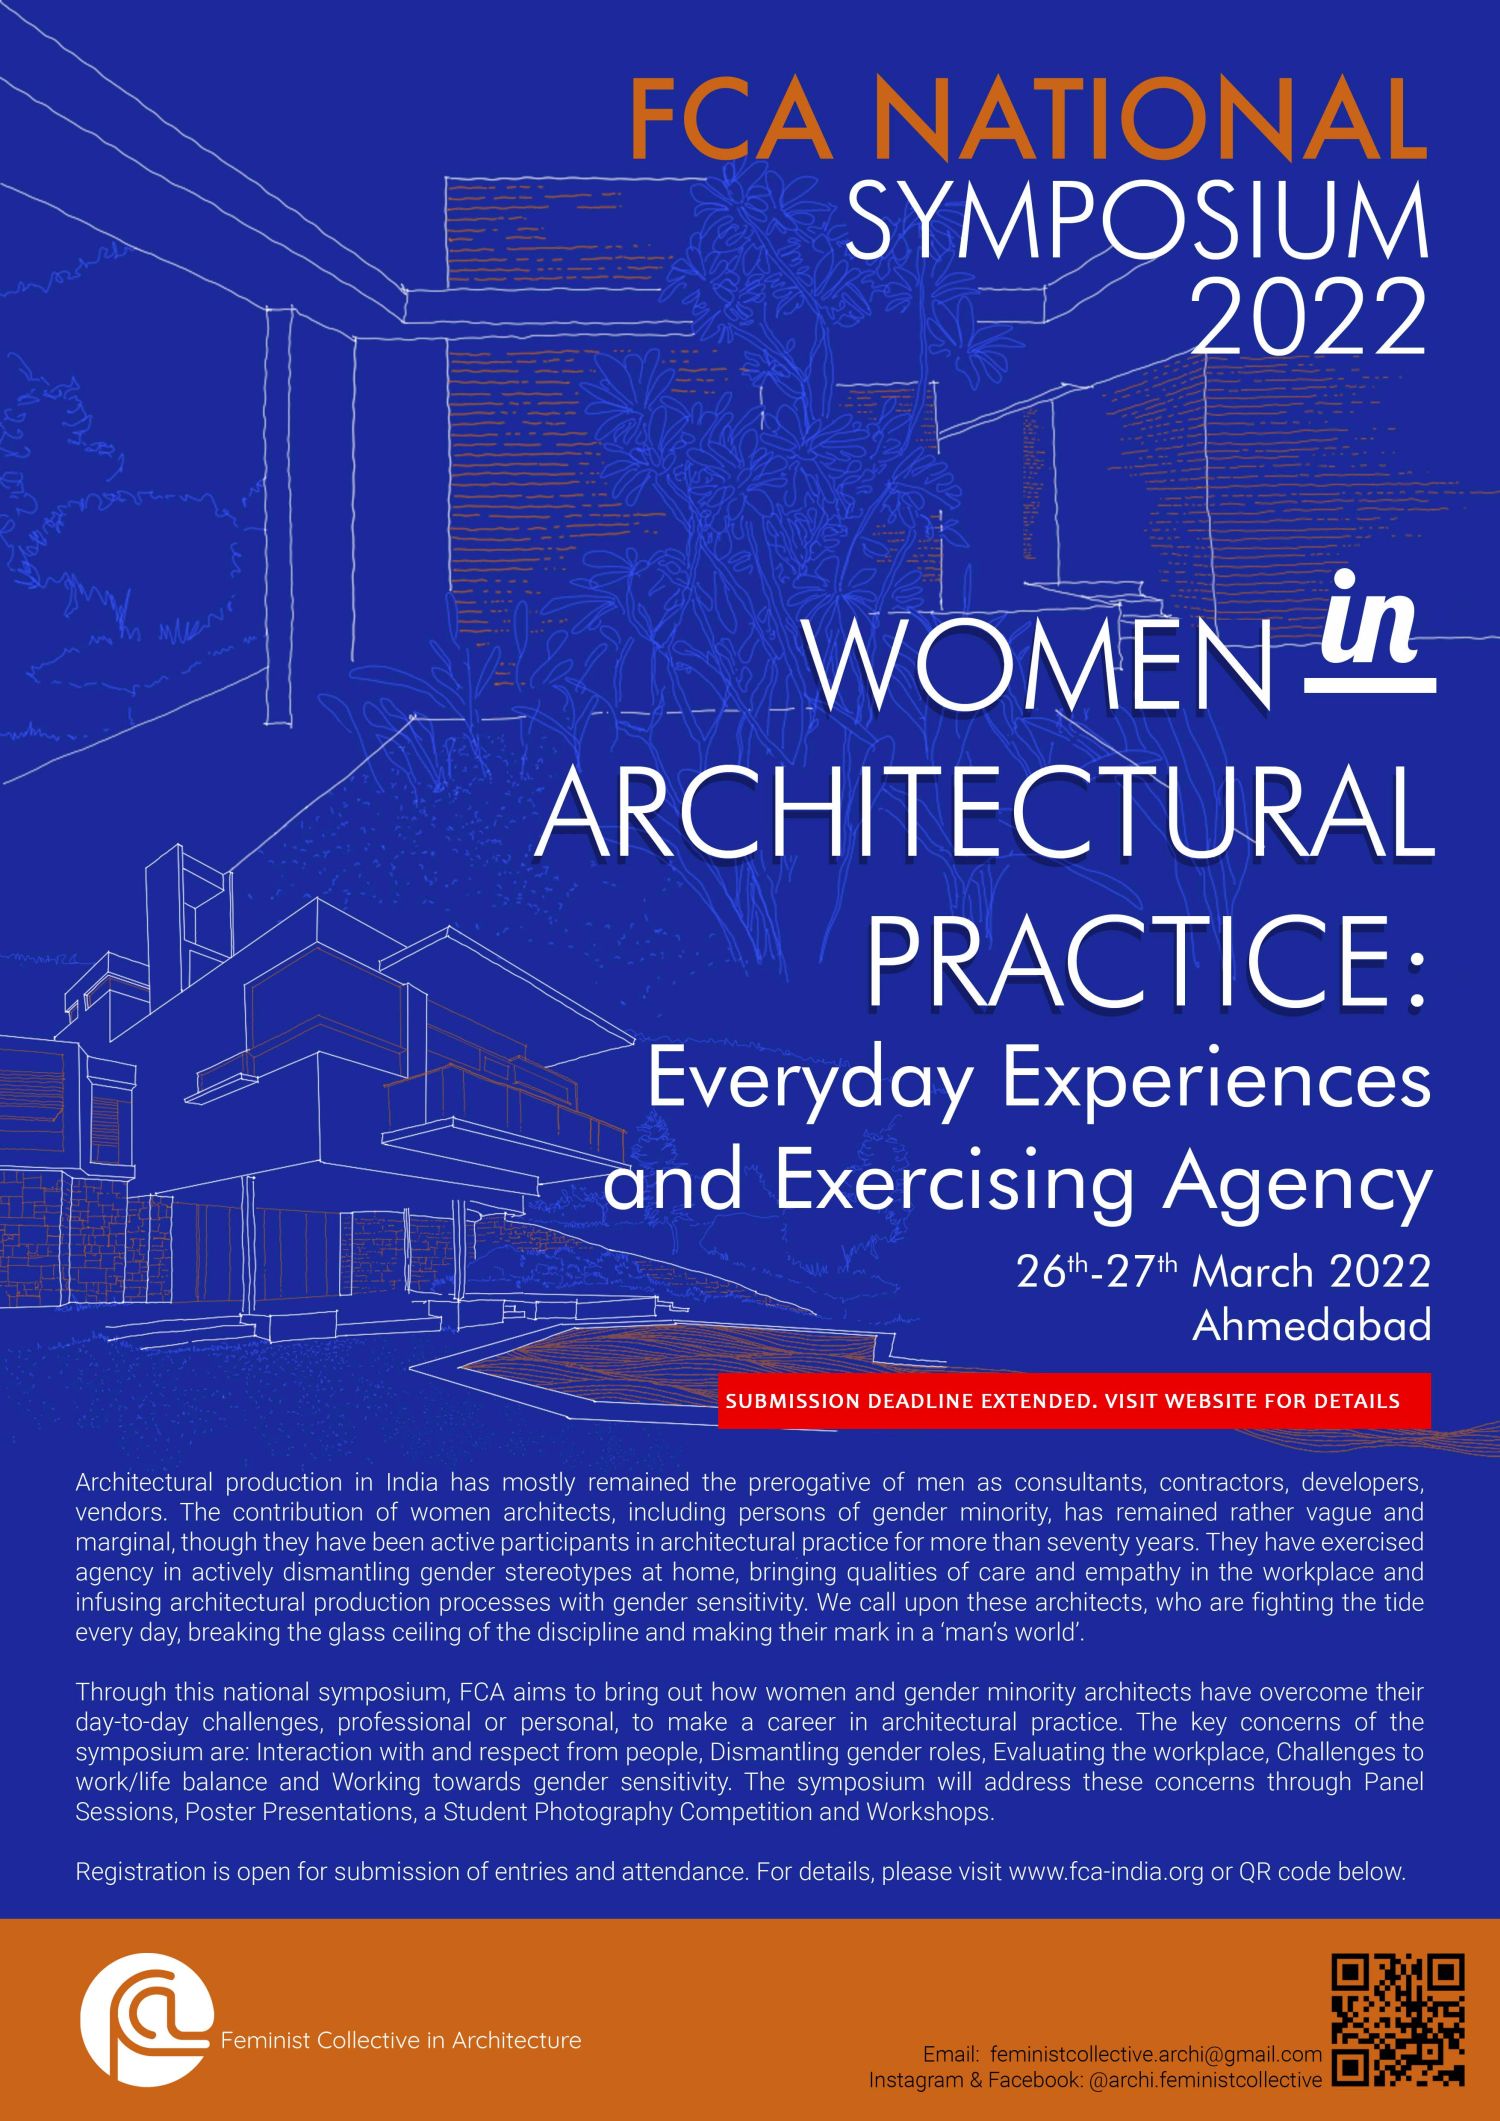 FCA National Symposium 2022, Women in Architectural Practice